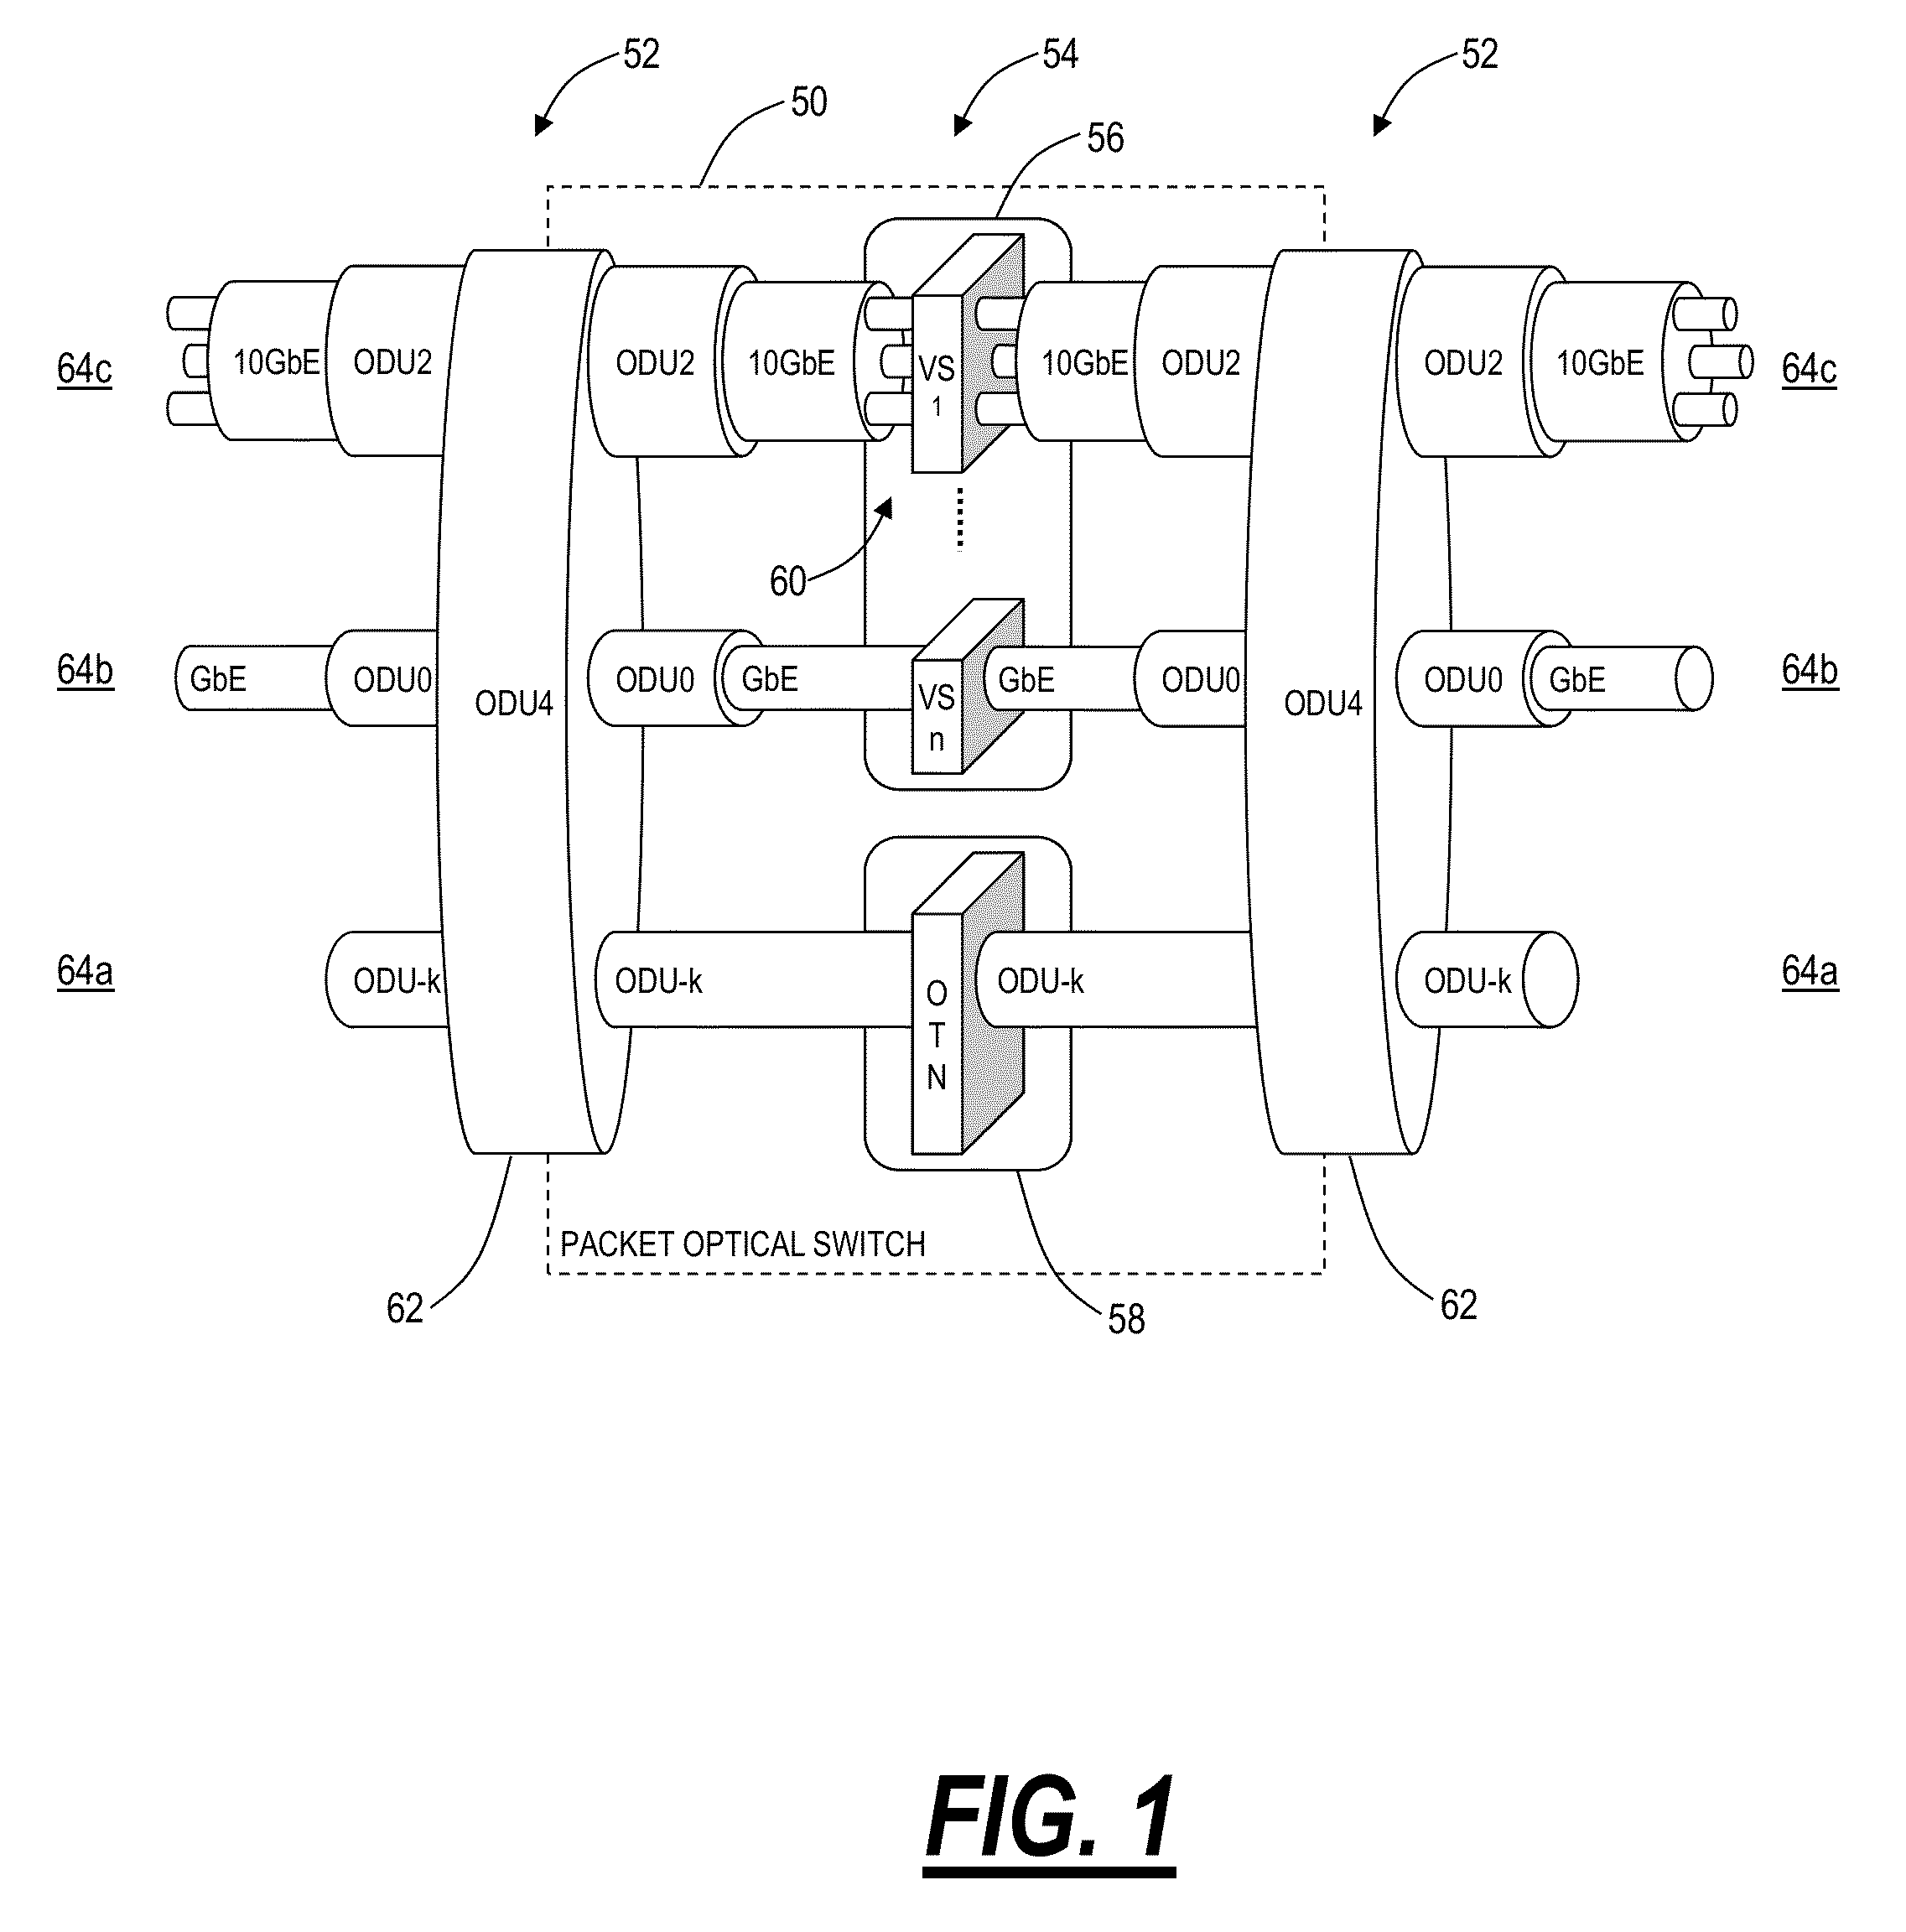 Ethernet private local area network systems and methods